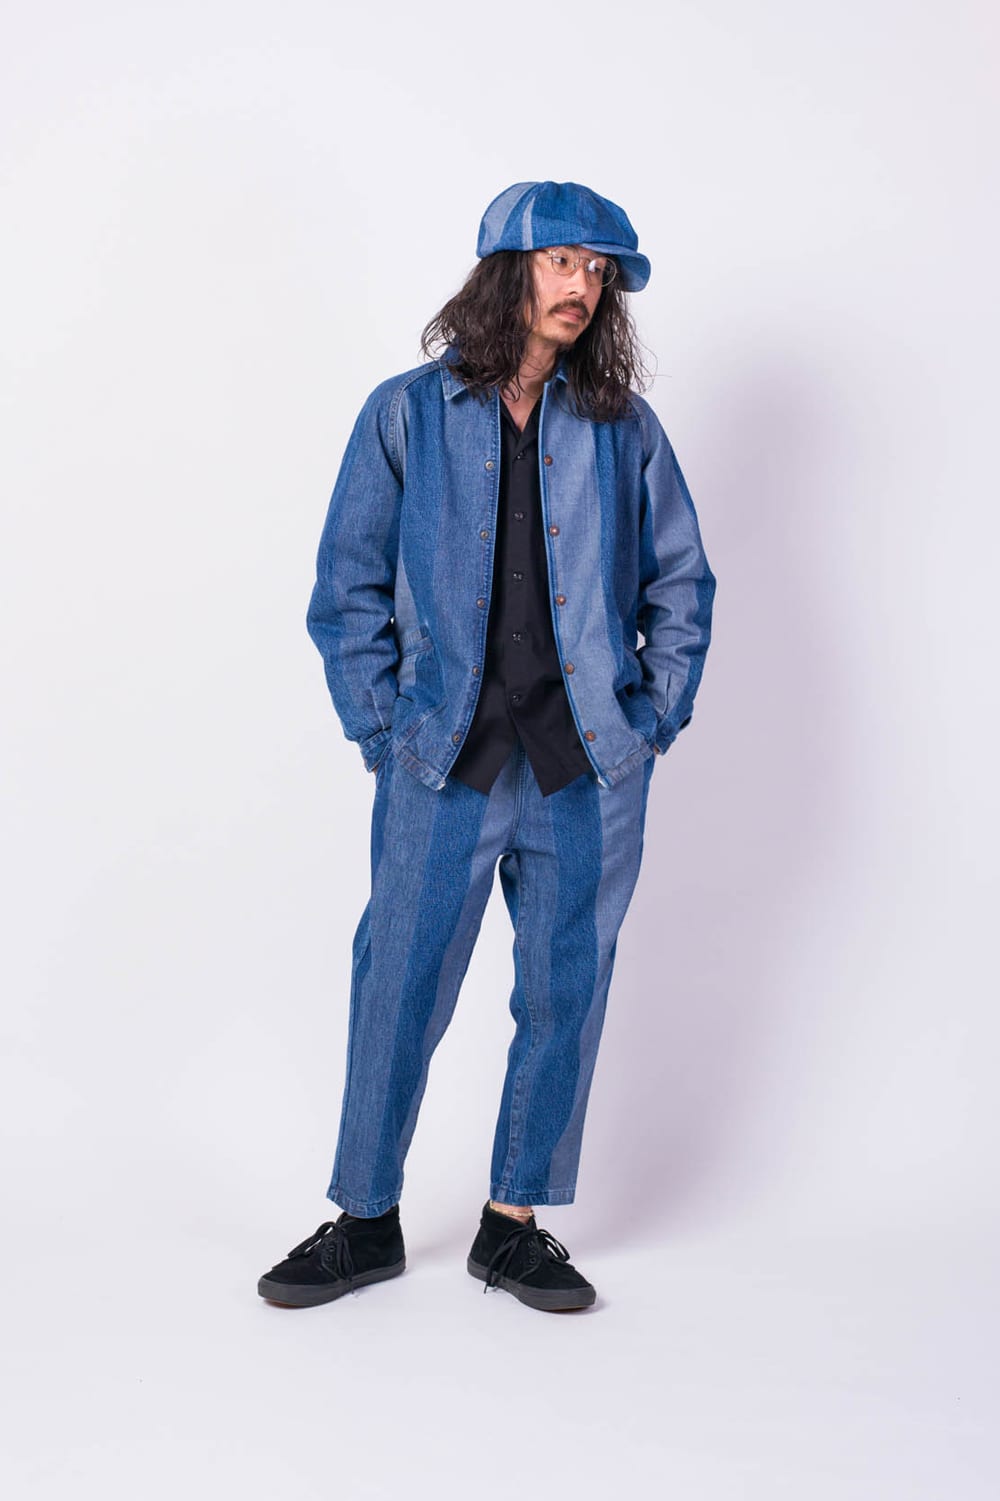 GOWEST 2018 FALL & WINTER COLLECTION